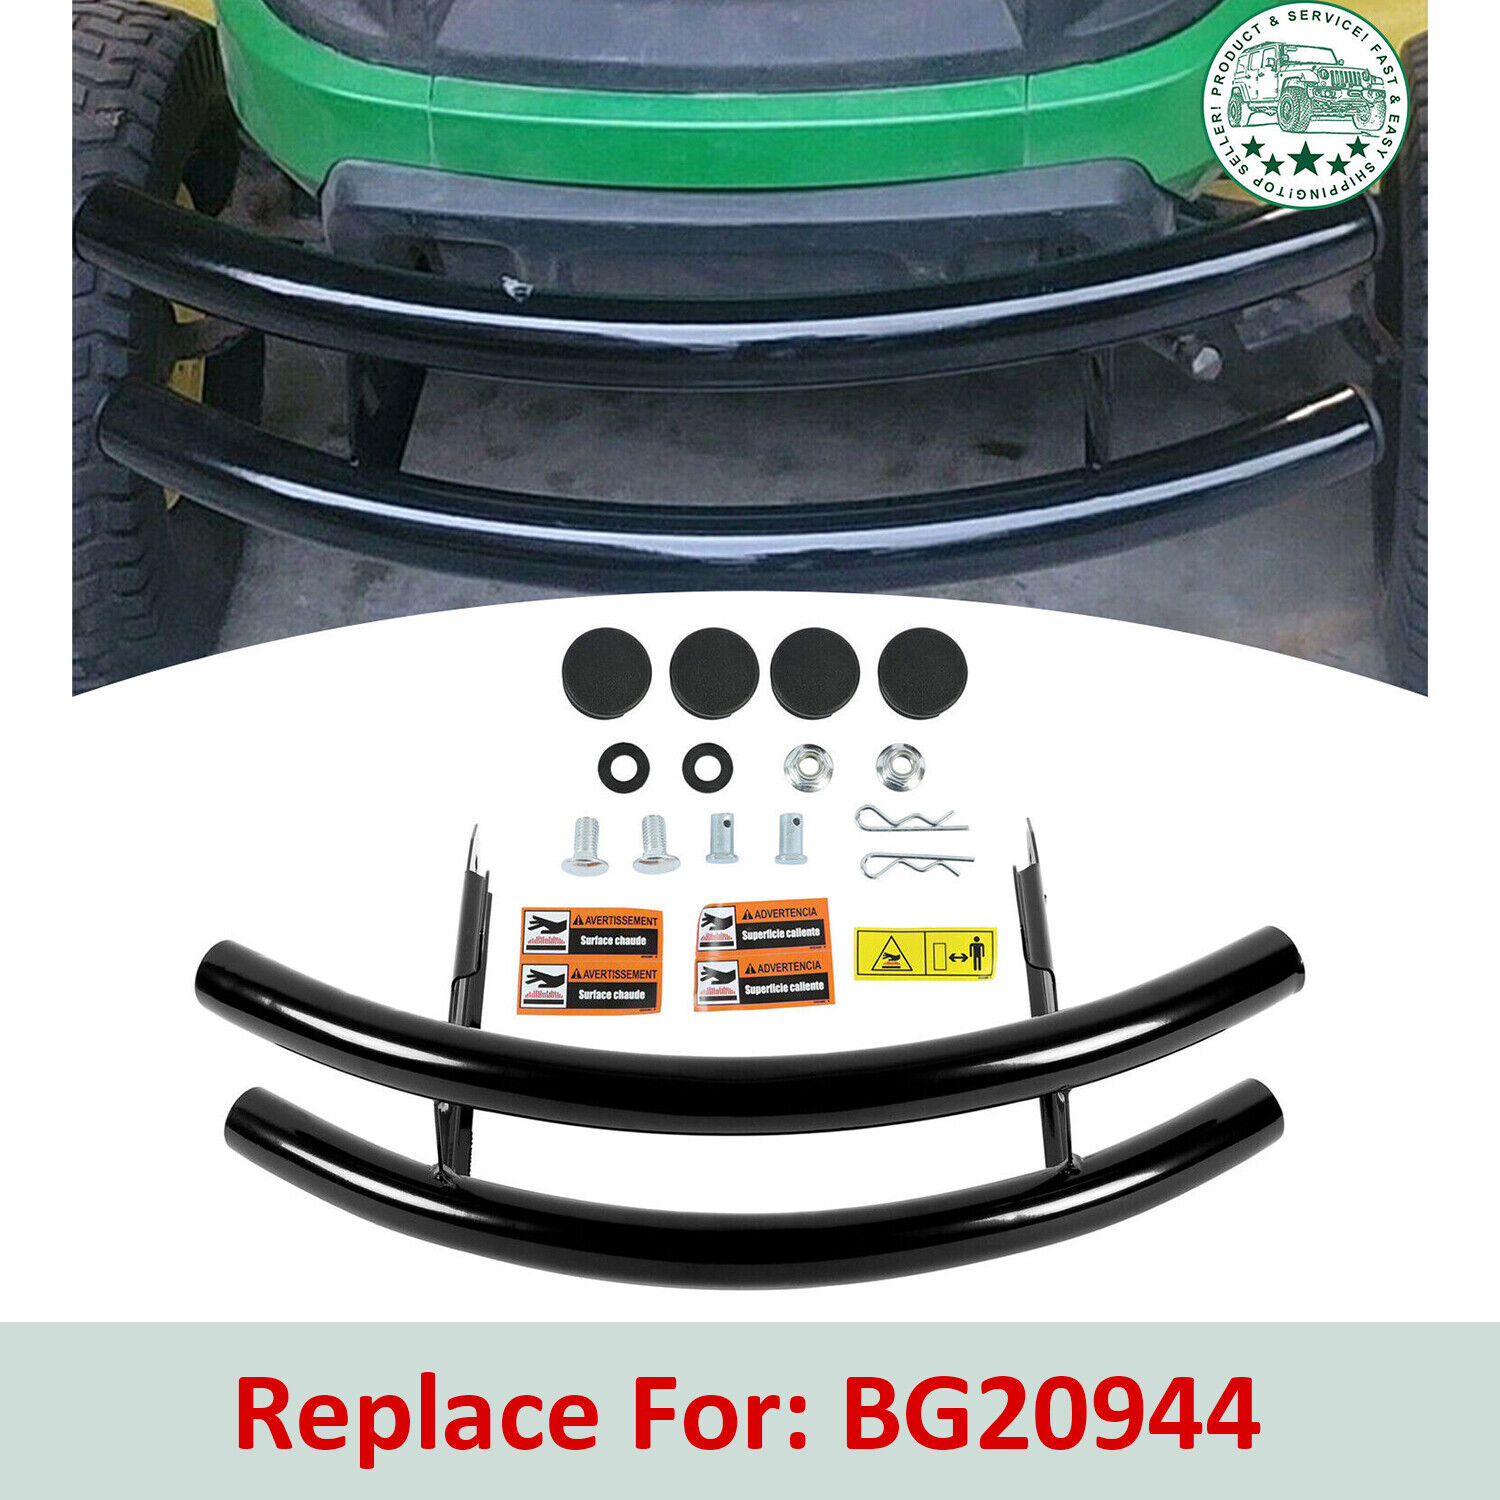 2-Bar Front Bumper Guard Lawn Protection W/ Stickers For John Deere 100 Series